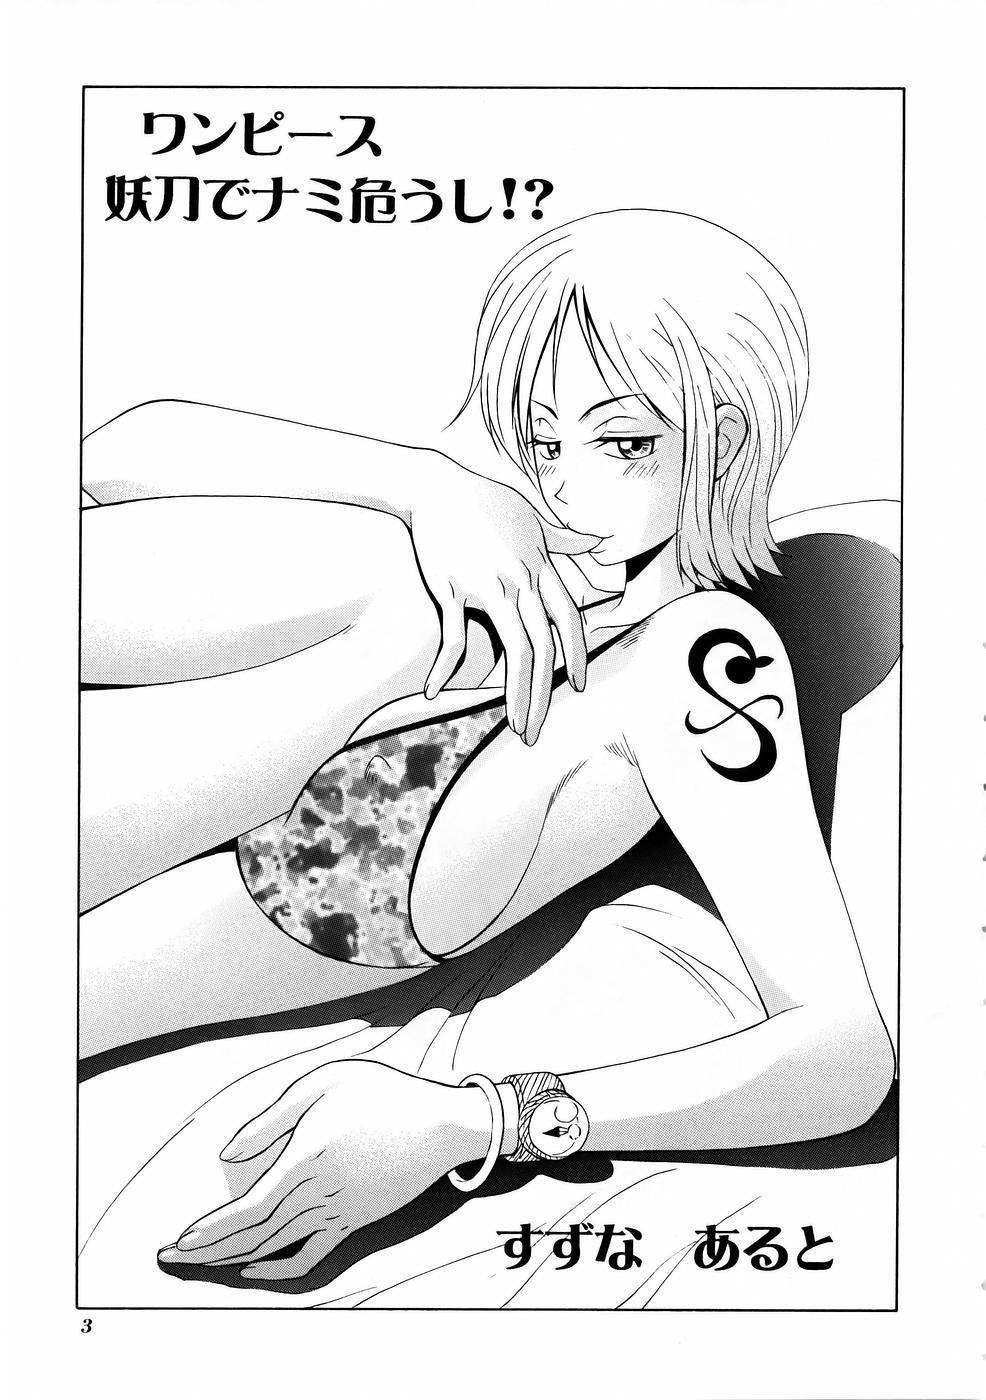 Asses Mikicy Vol. 4 - One piece Bukkake Boys - Page 4